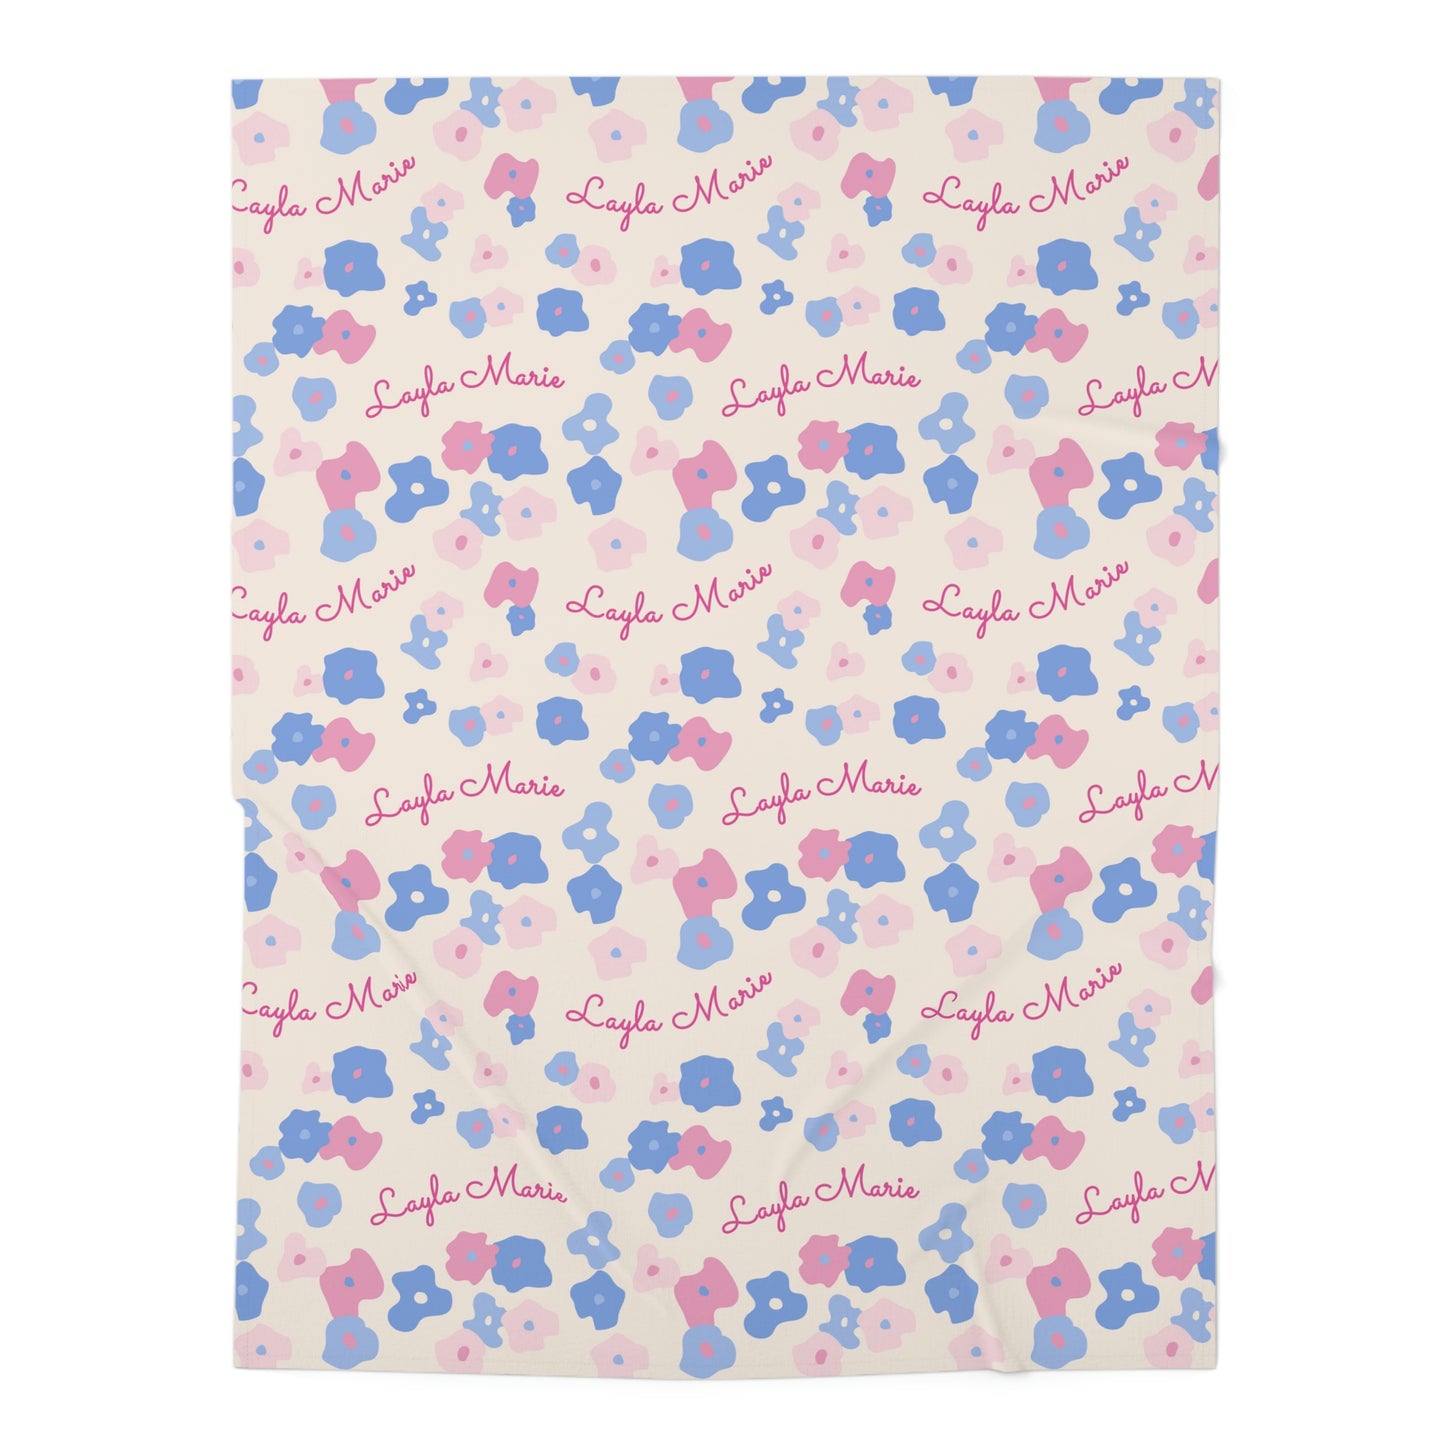 Jersey personalized baby blanket in graphic pink and blue daisy pattern laid flat